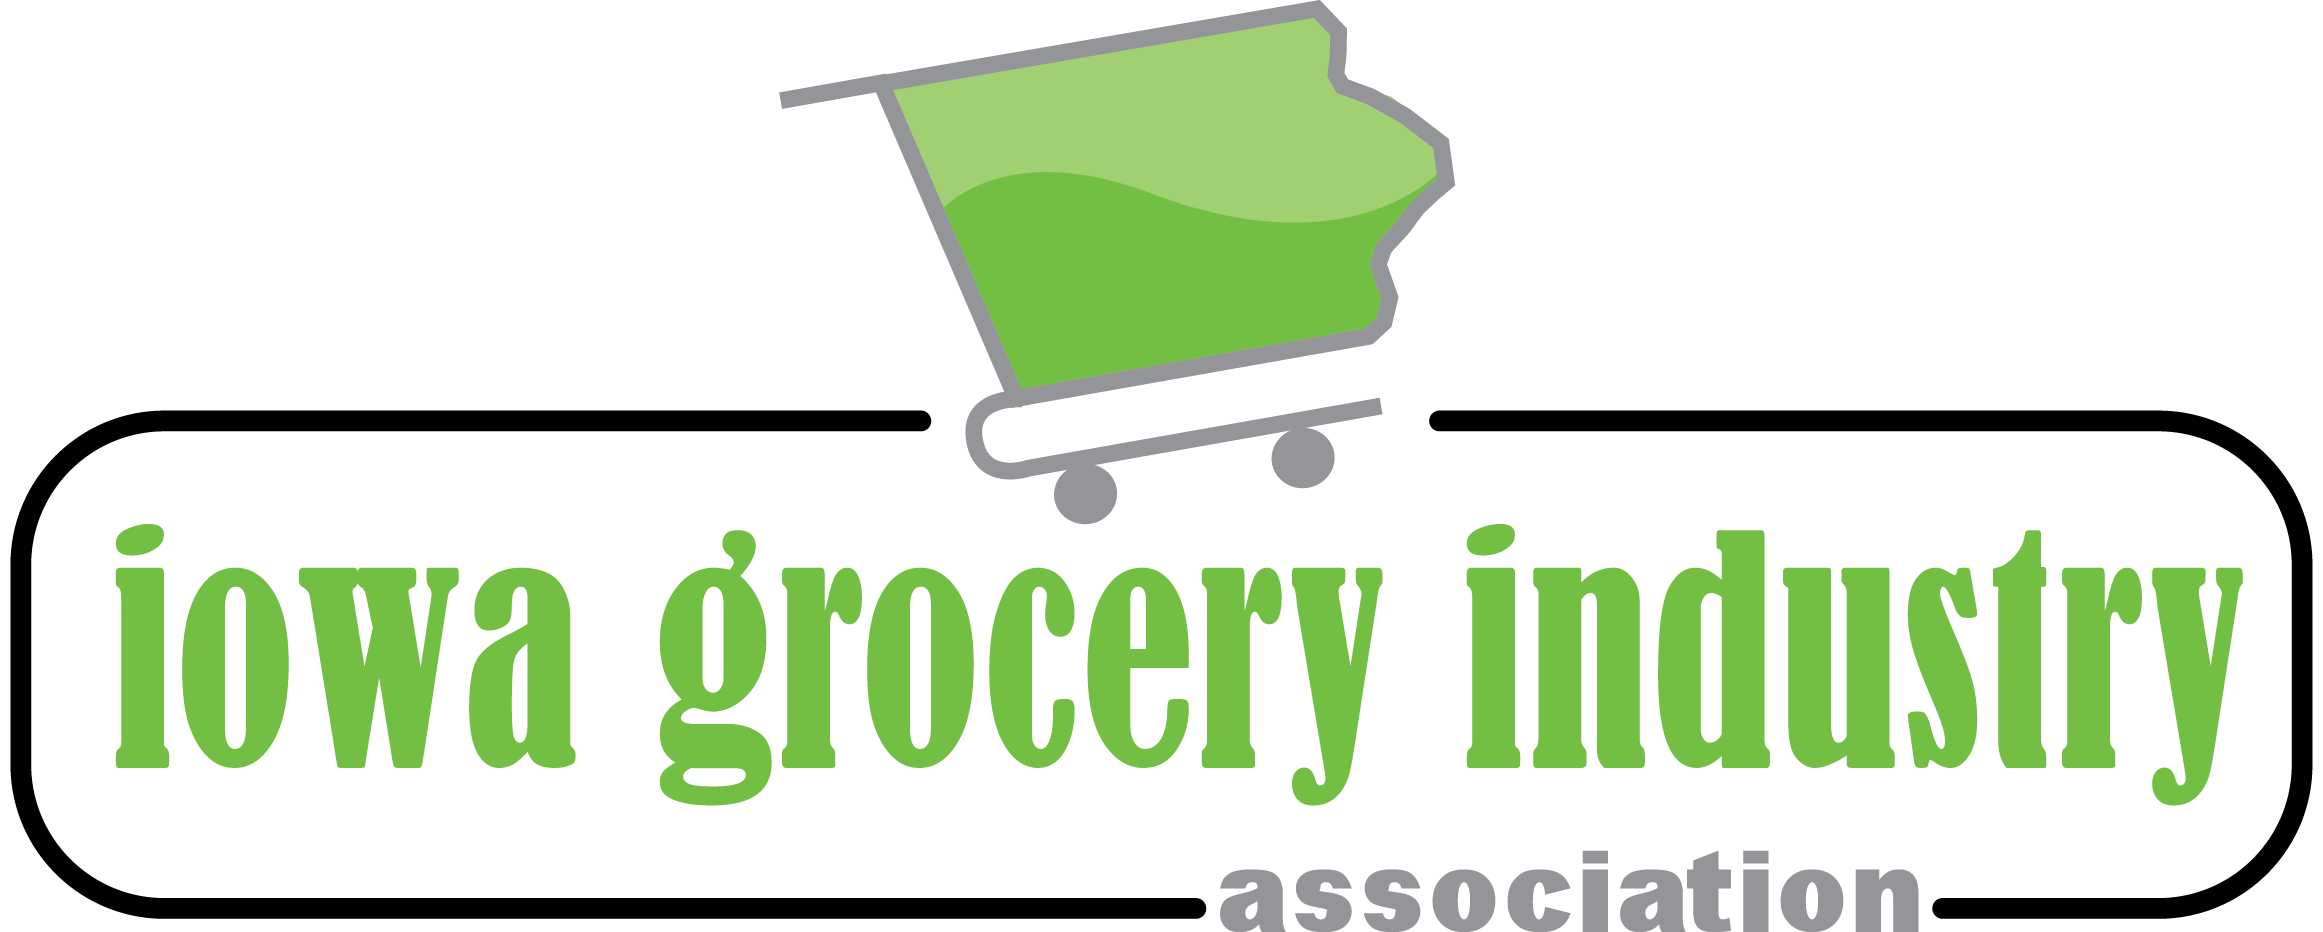 grocery clipart grocery bagger